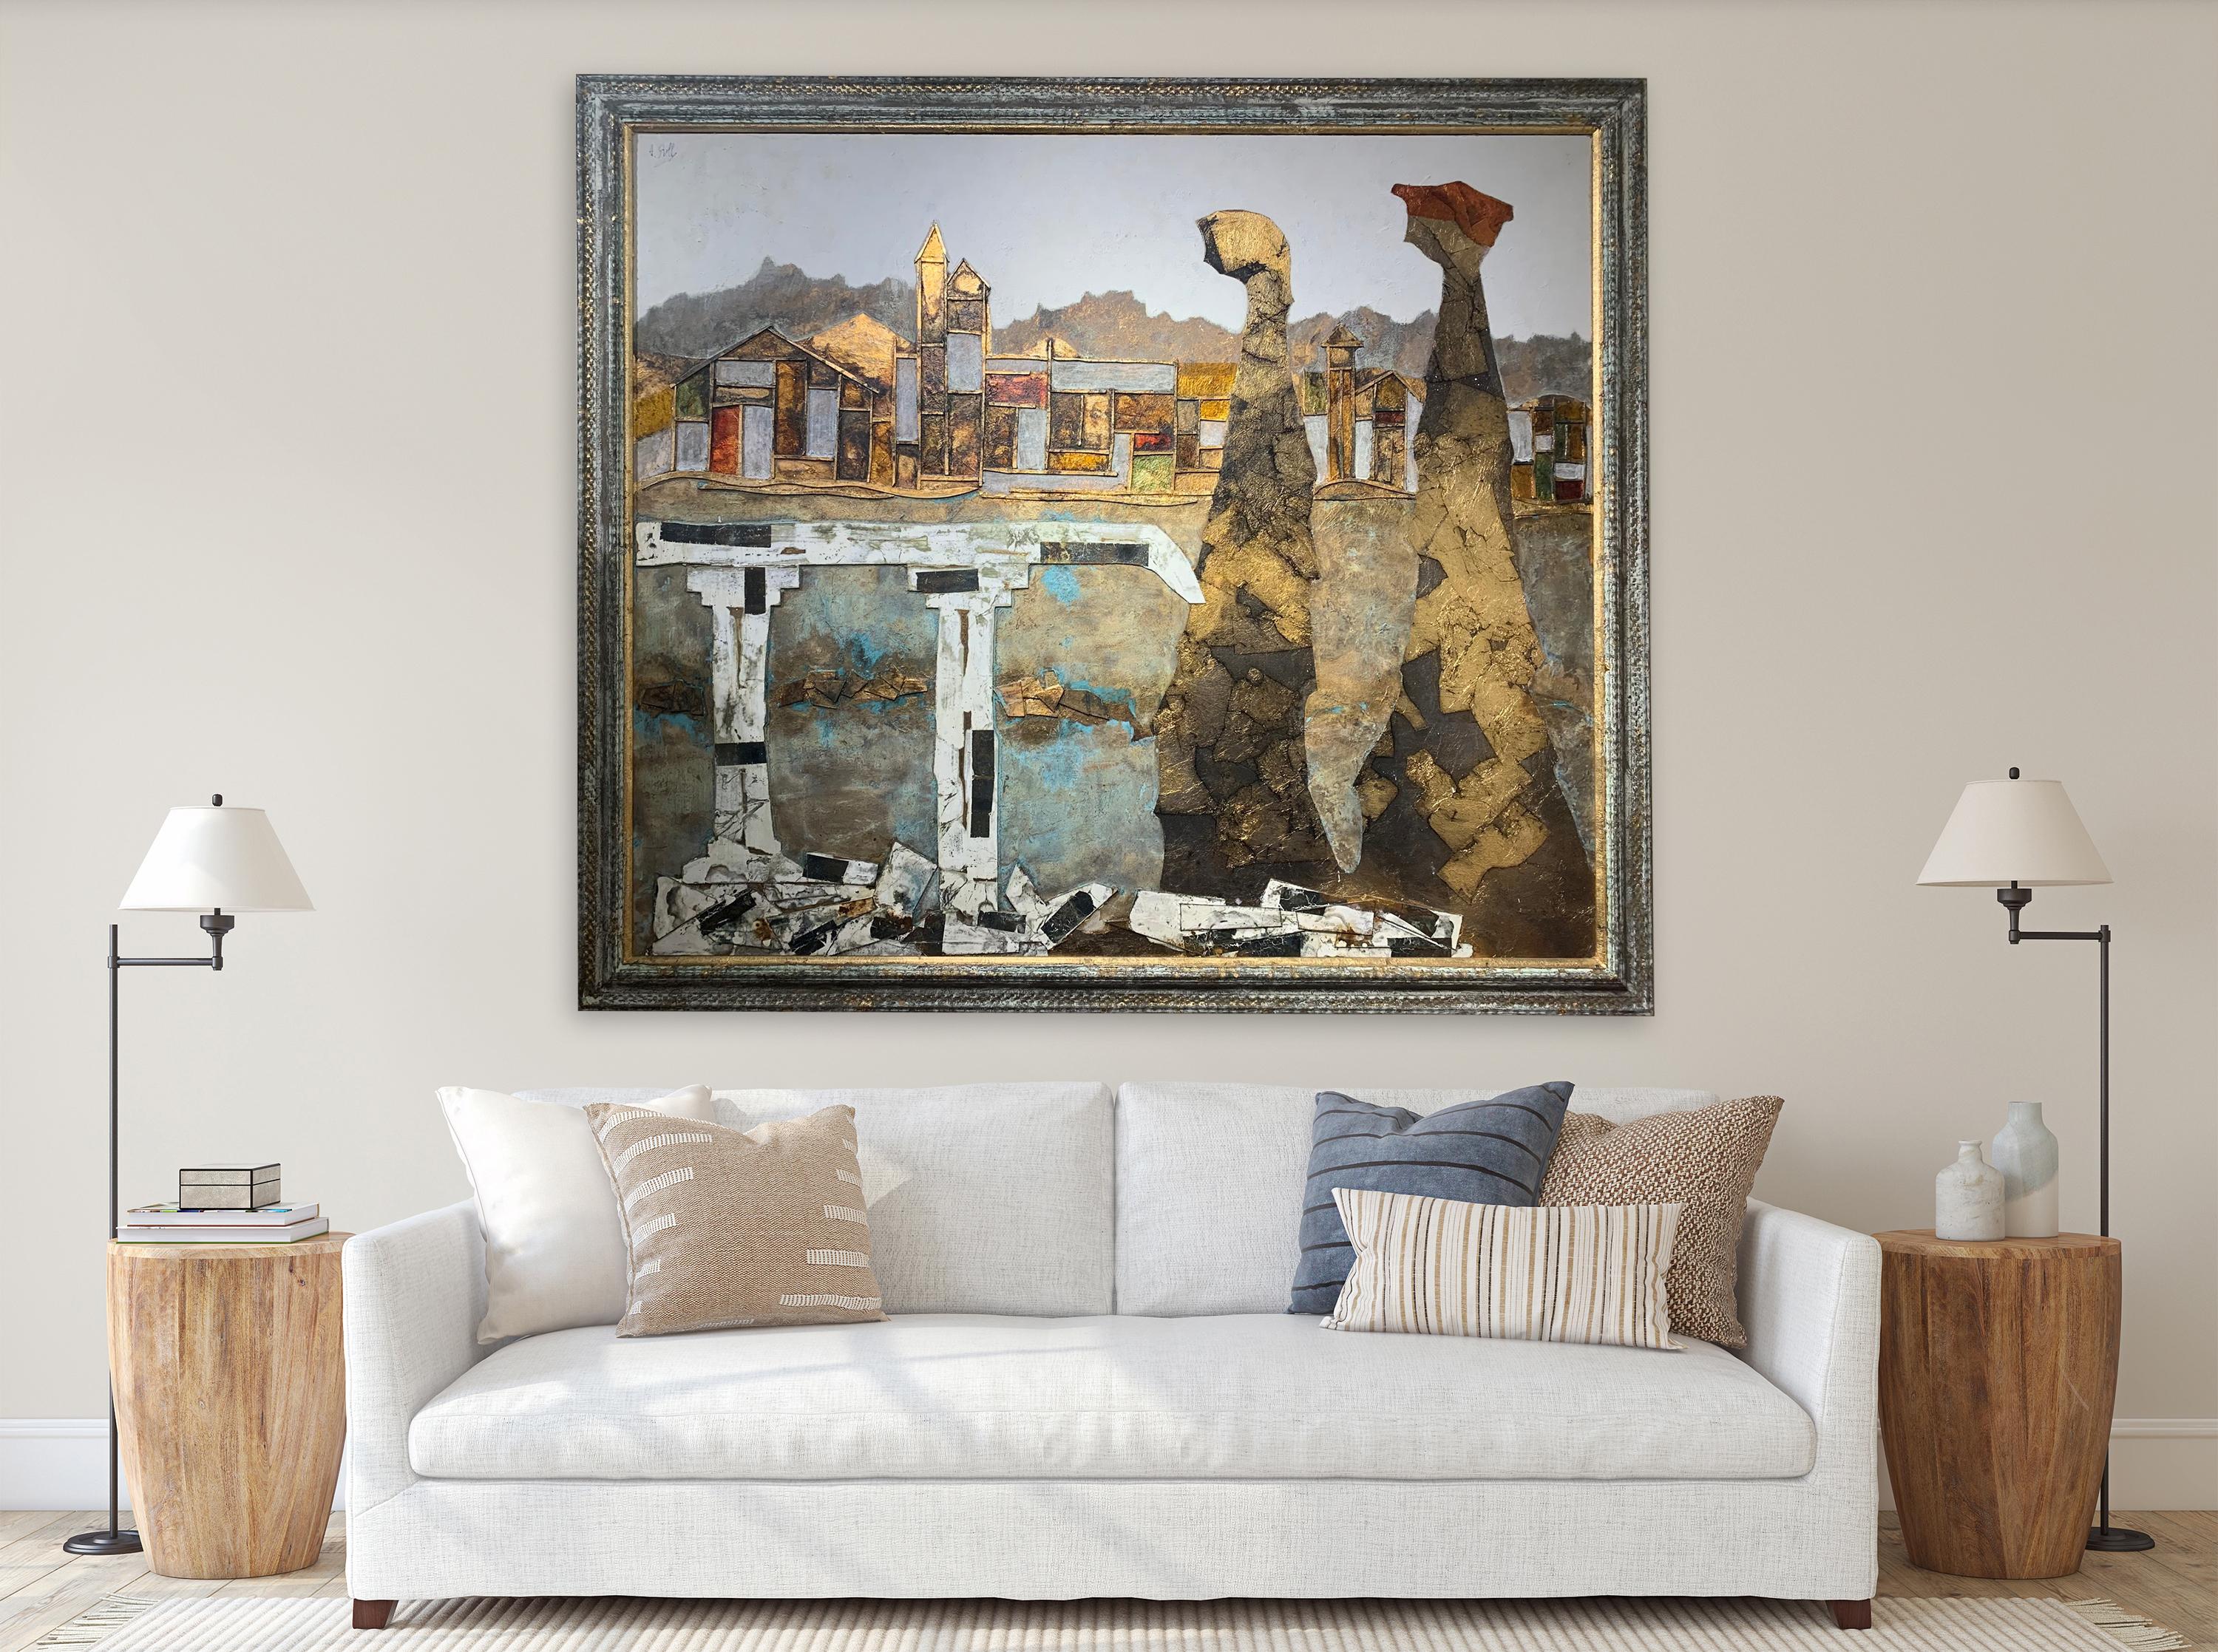 In The Old Venice - Andrea Stella- Figurative Abstract Painting-Mixed Media - Contemporary Mixed Media Art by ANDREA STELLA